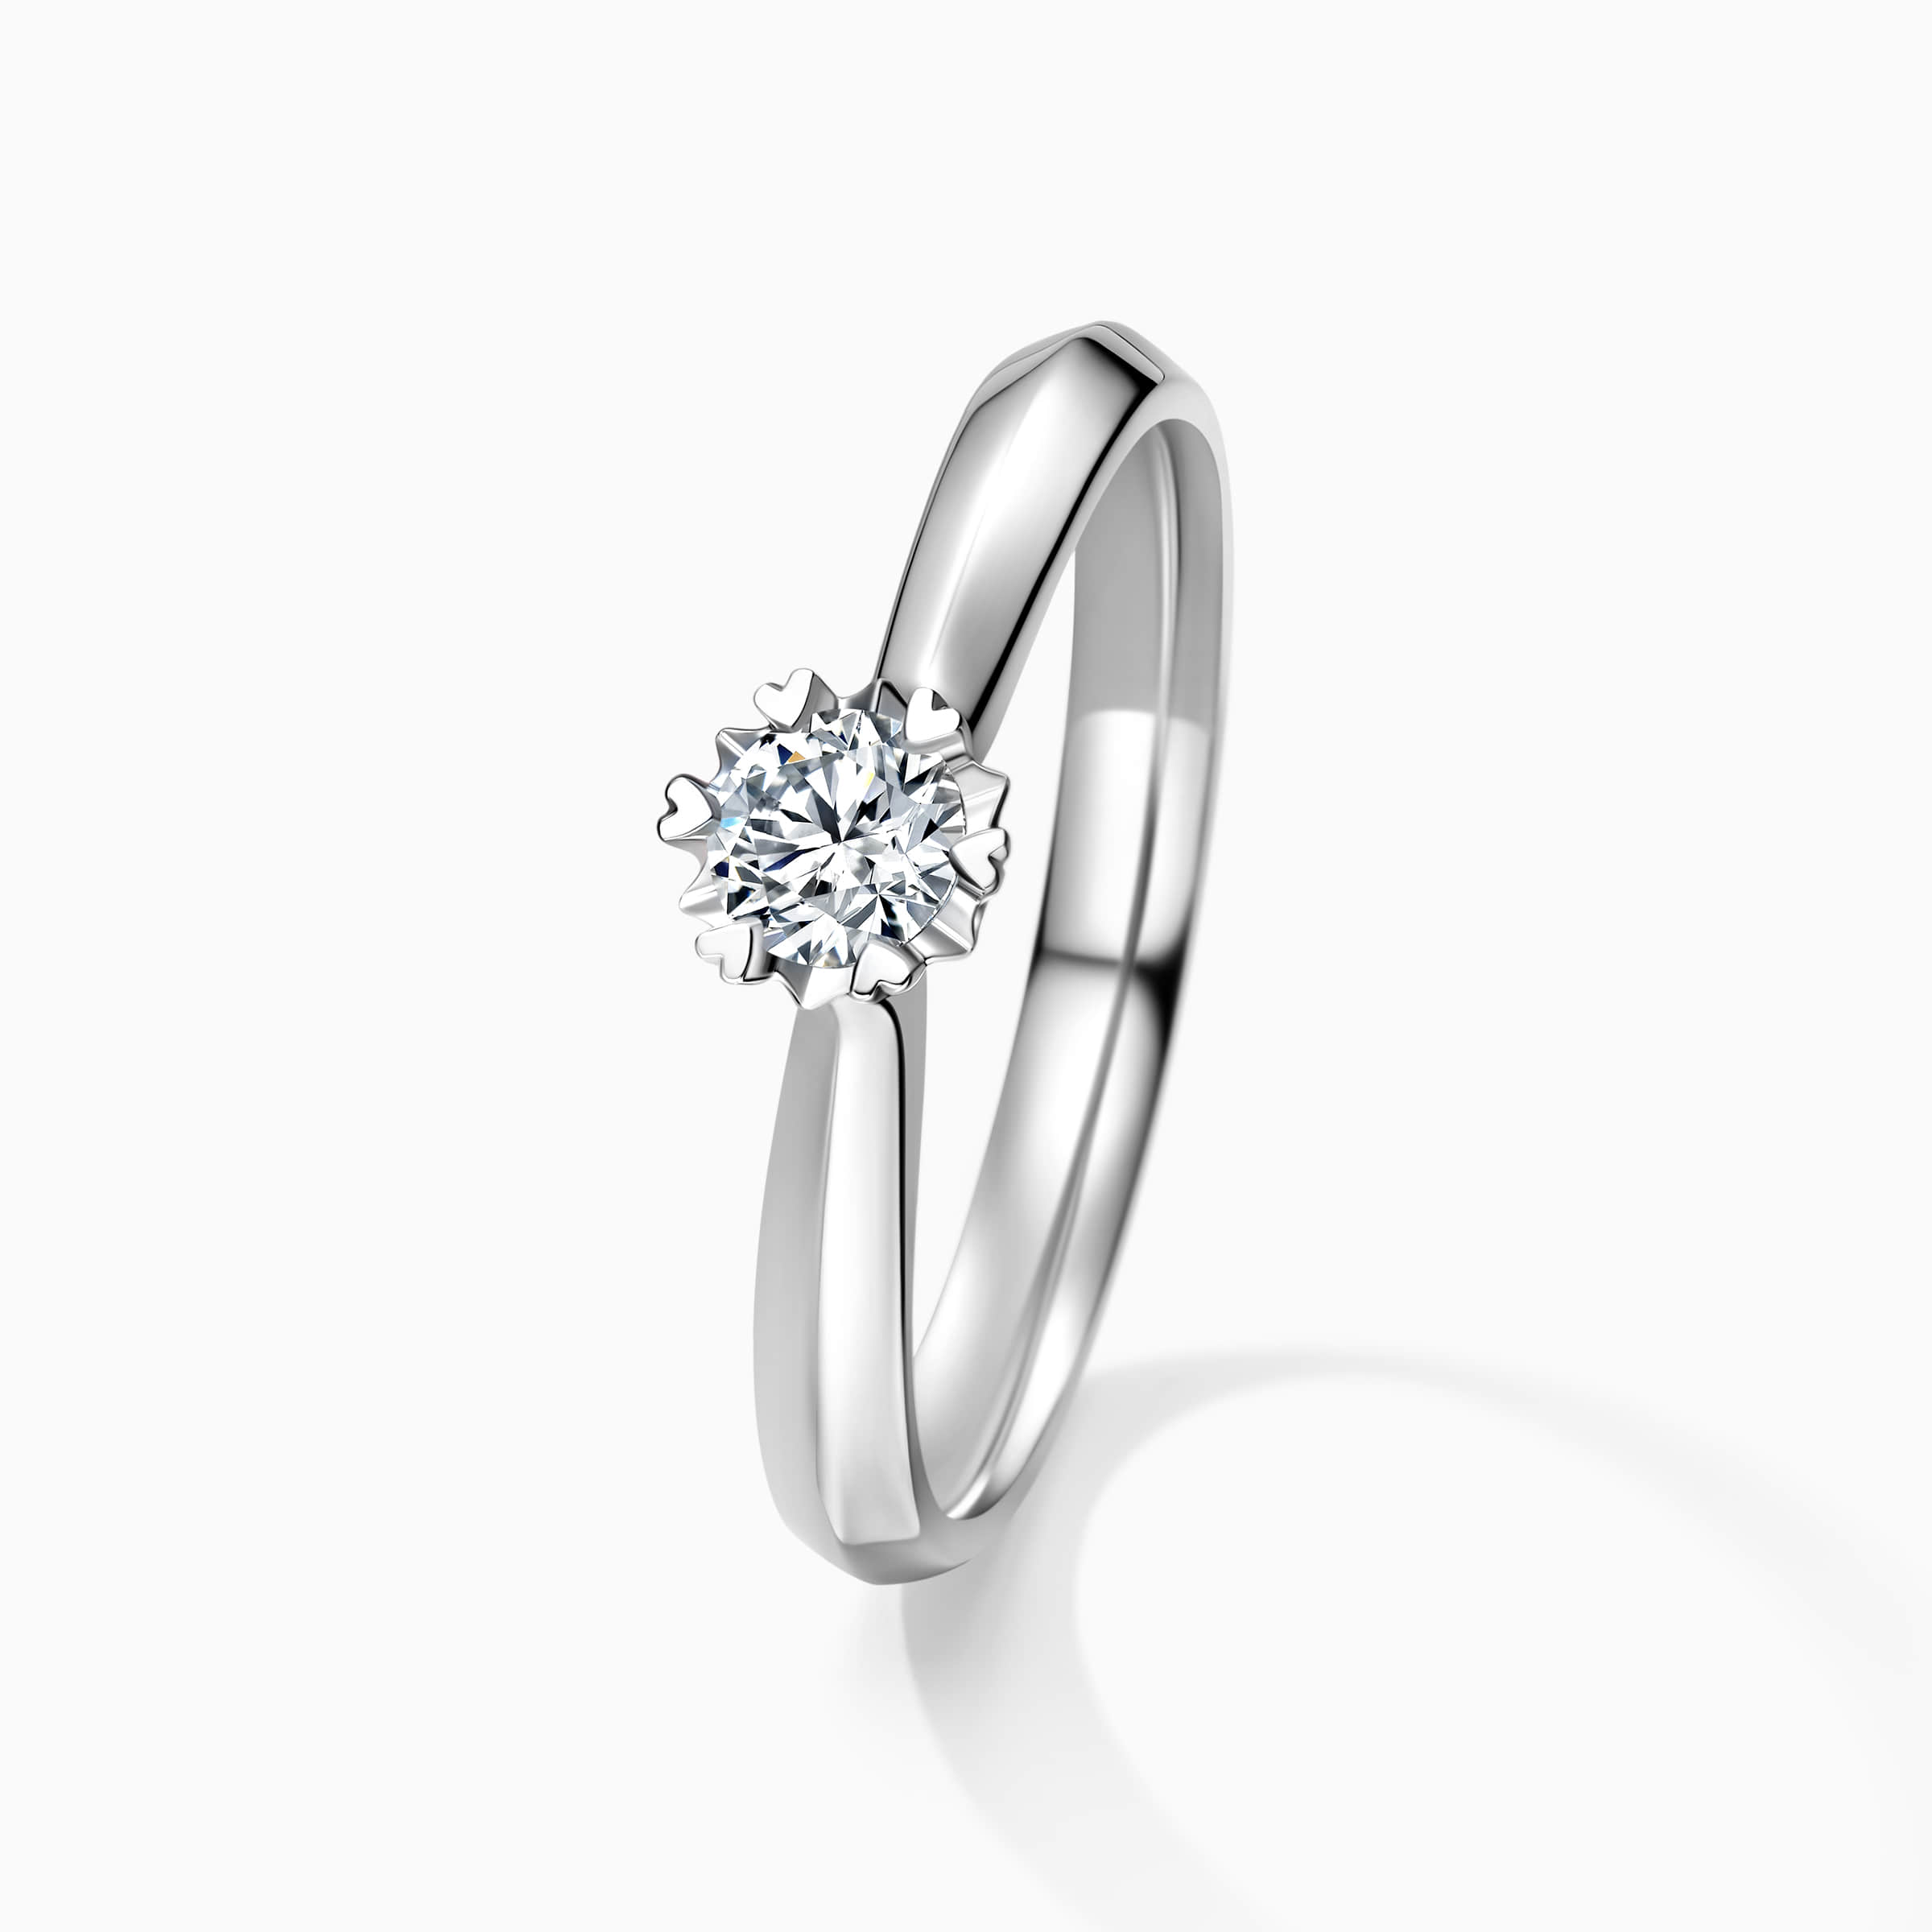 Darry Ring snowflake diamond promise ring angle view